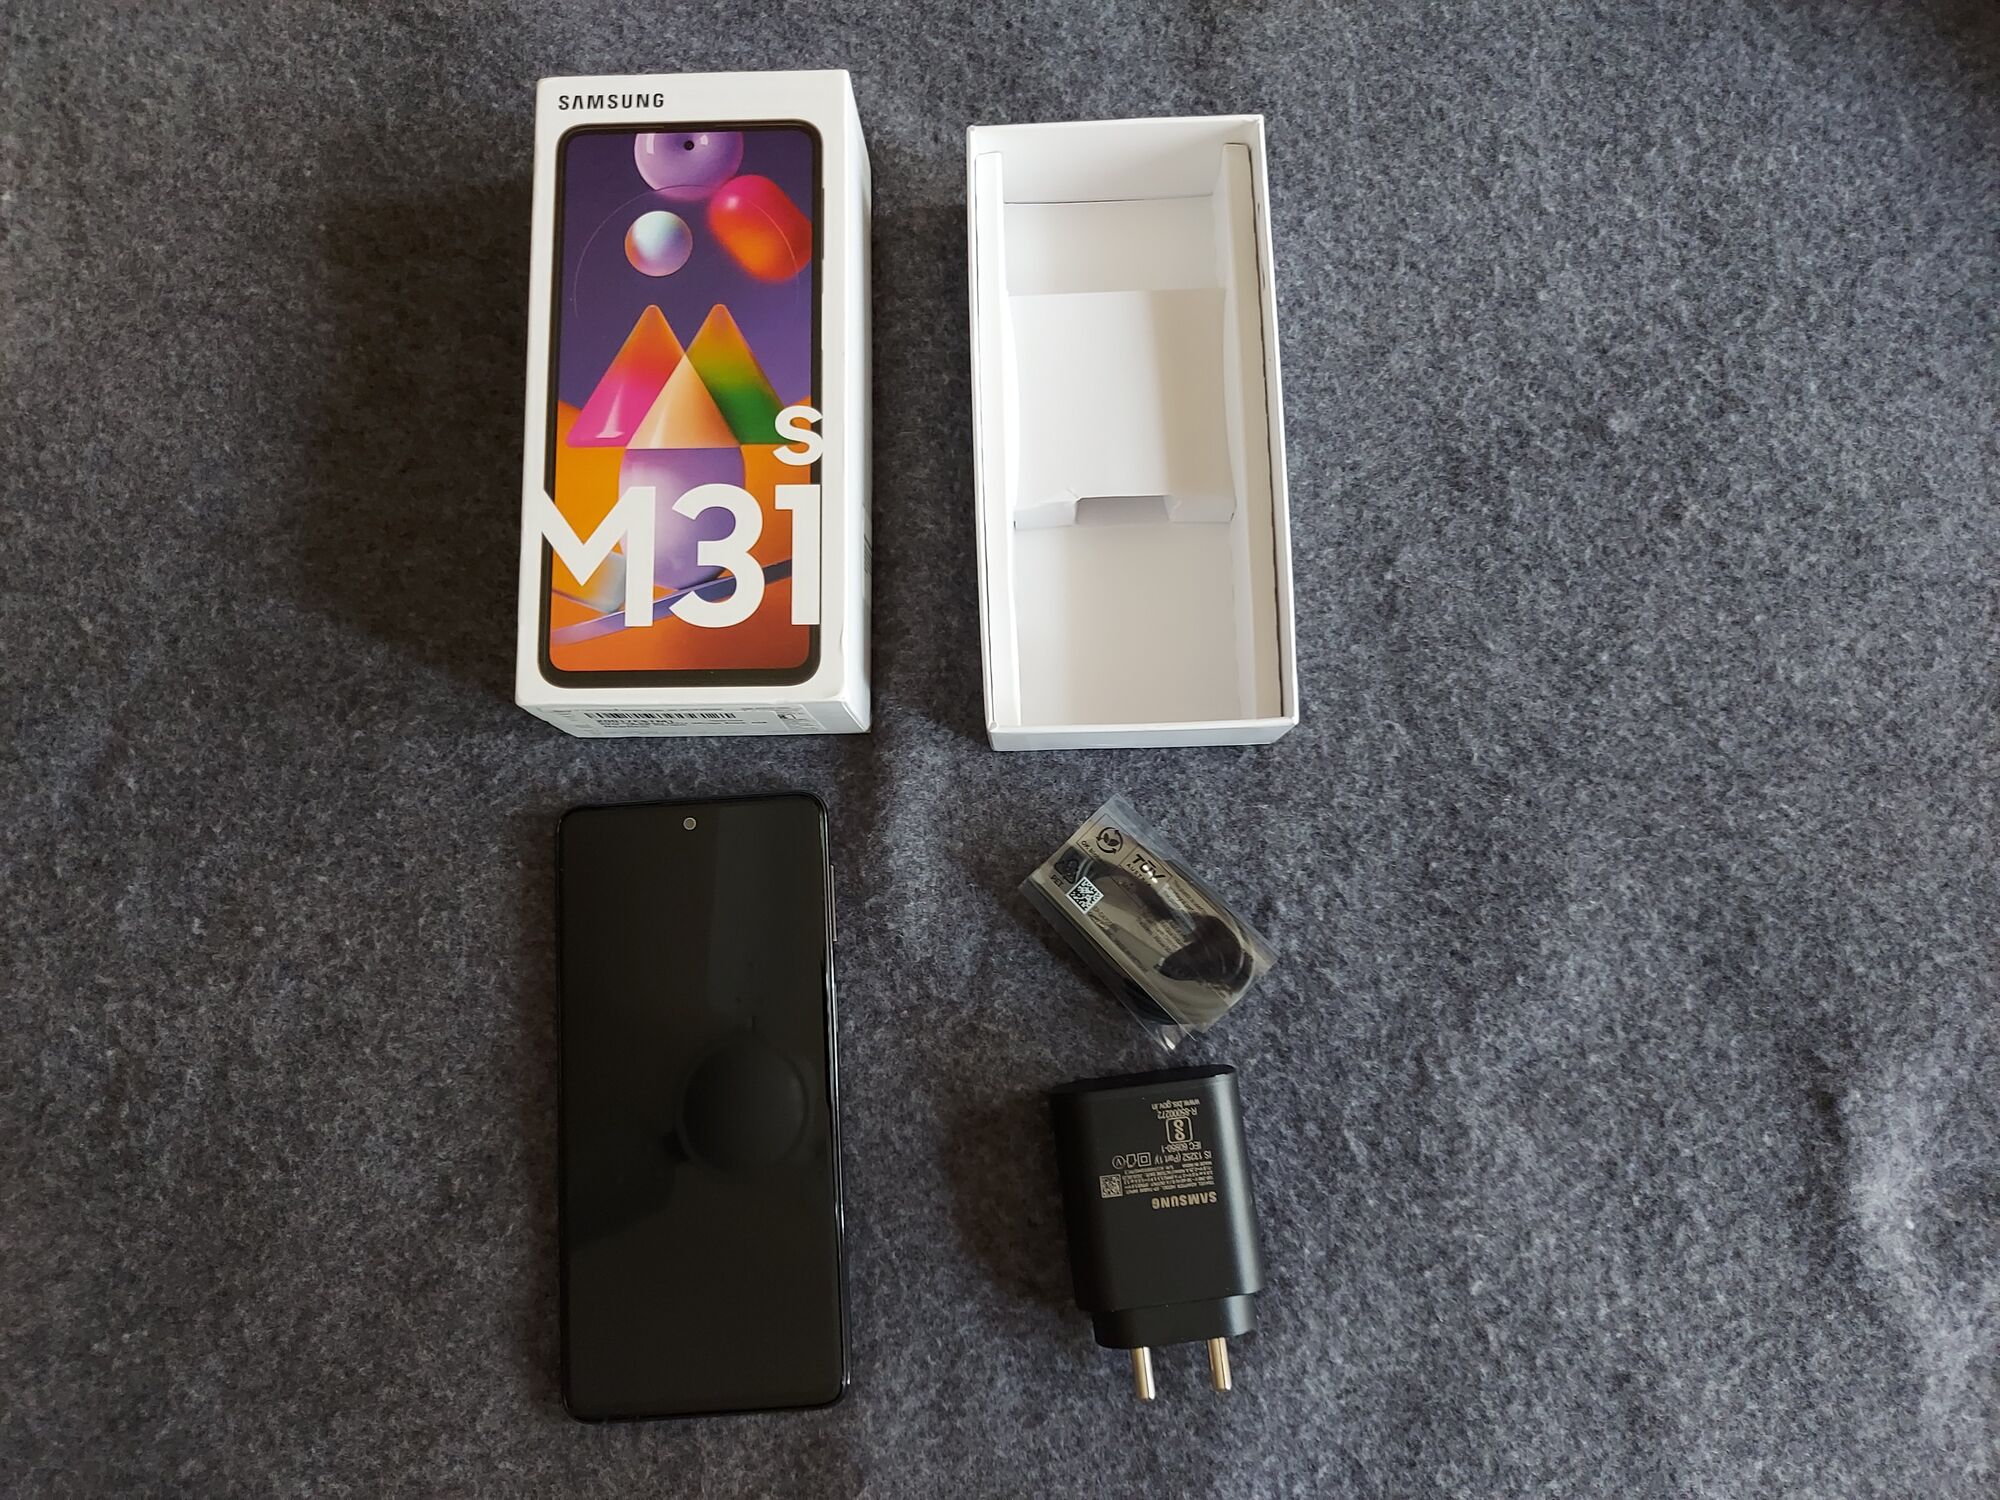 Unboxing of Samsung Galaxy M31s